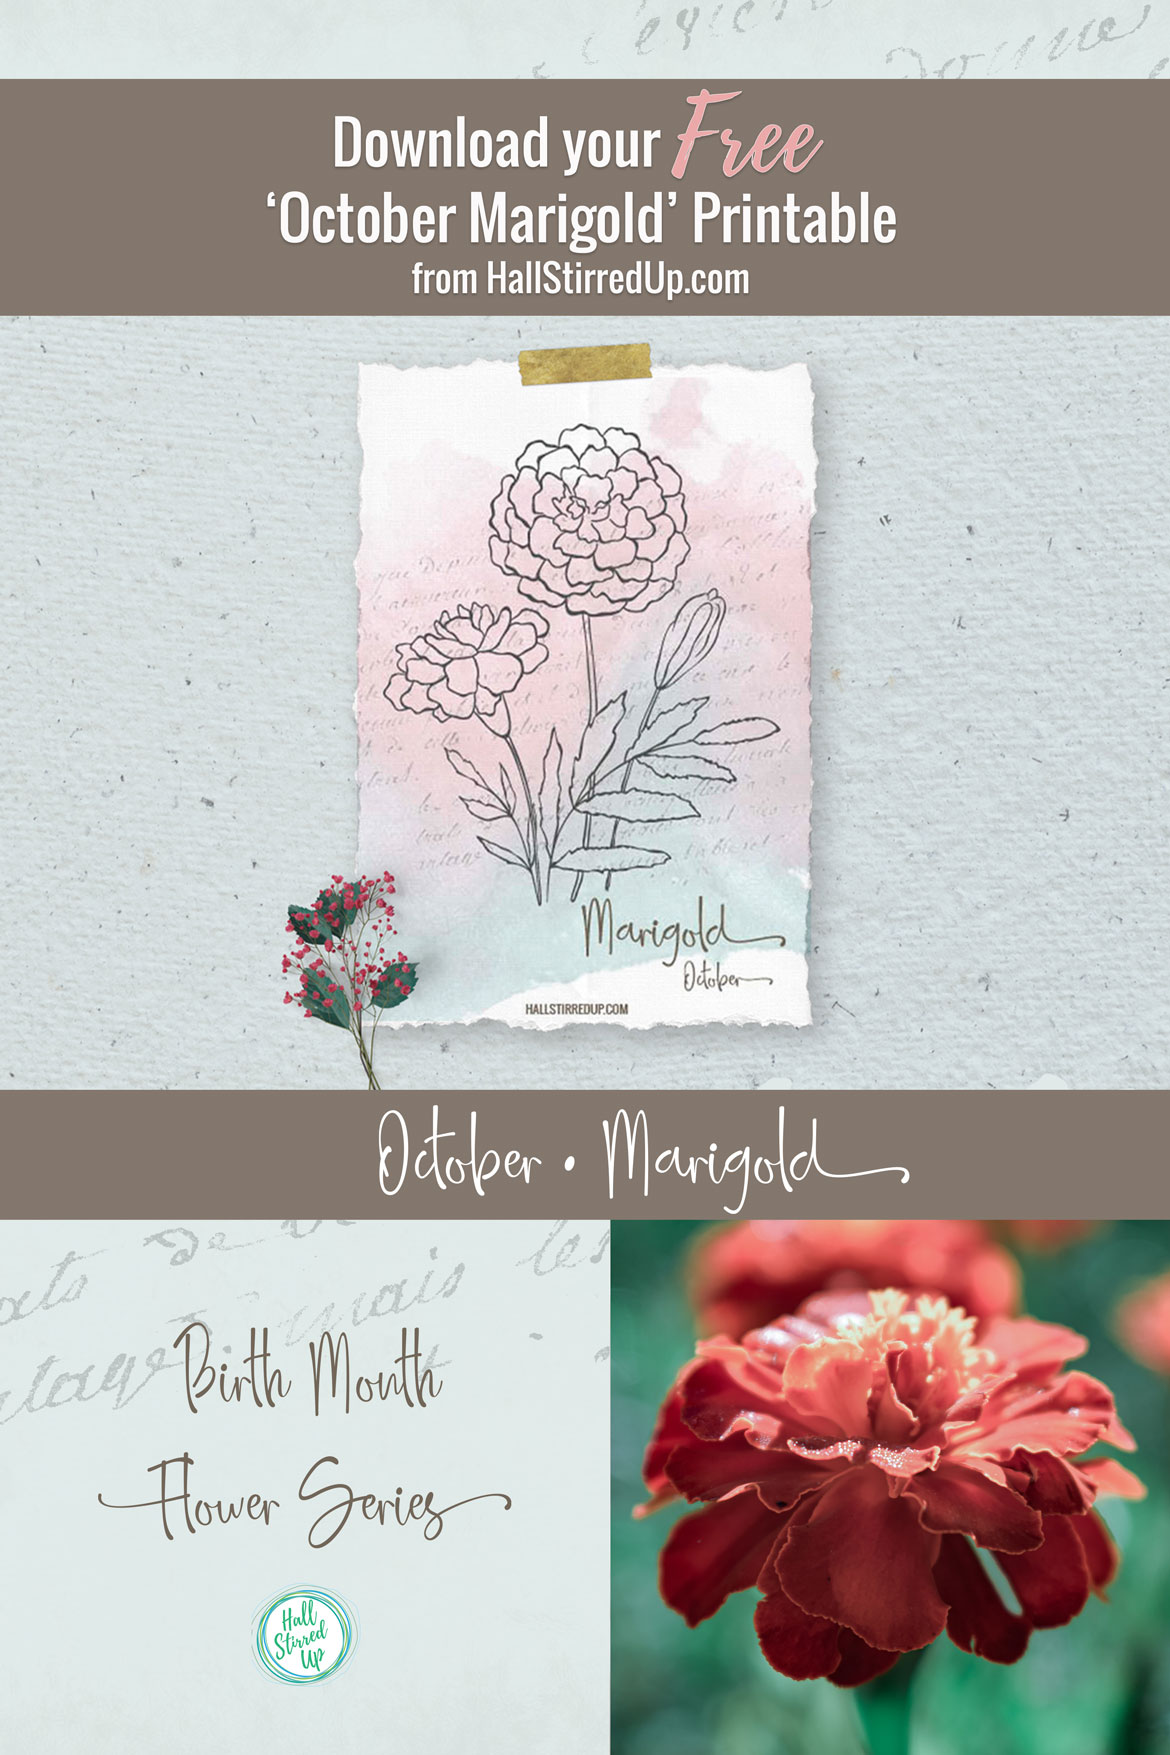 The spicy Marigold is October's birth flower Includes free printable